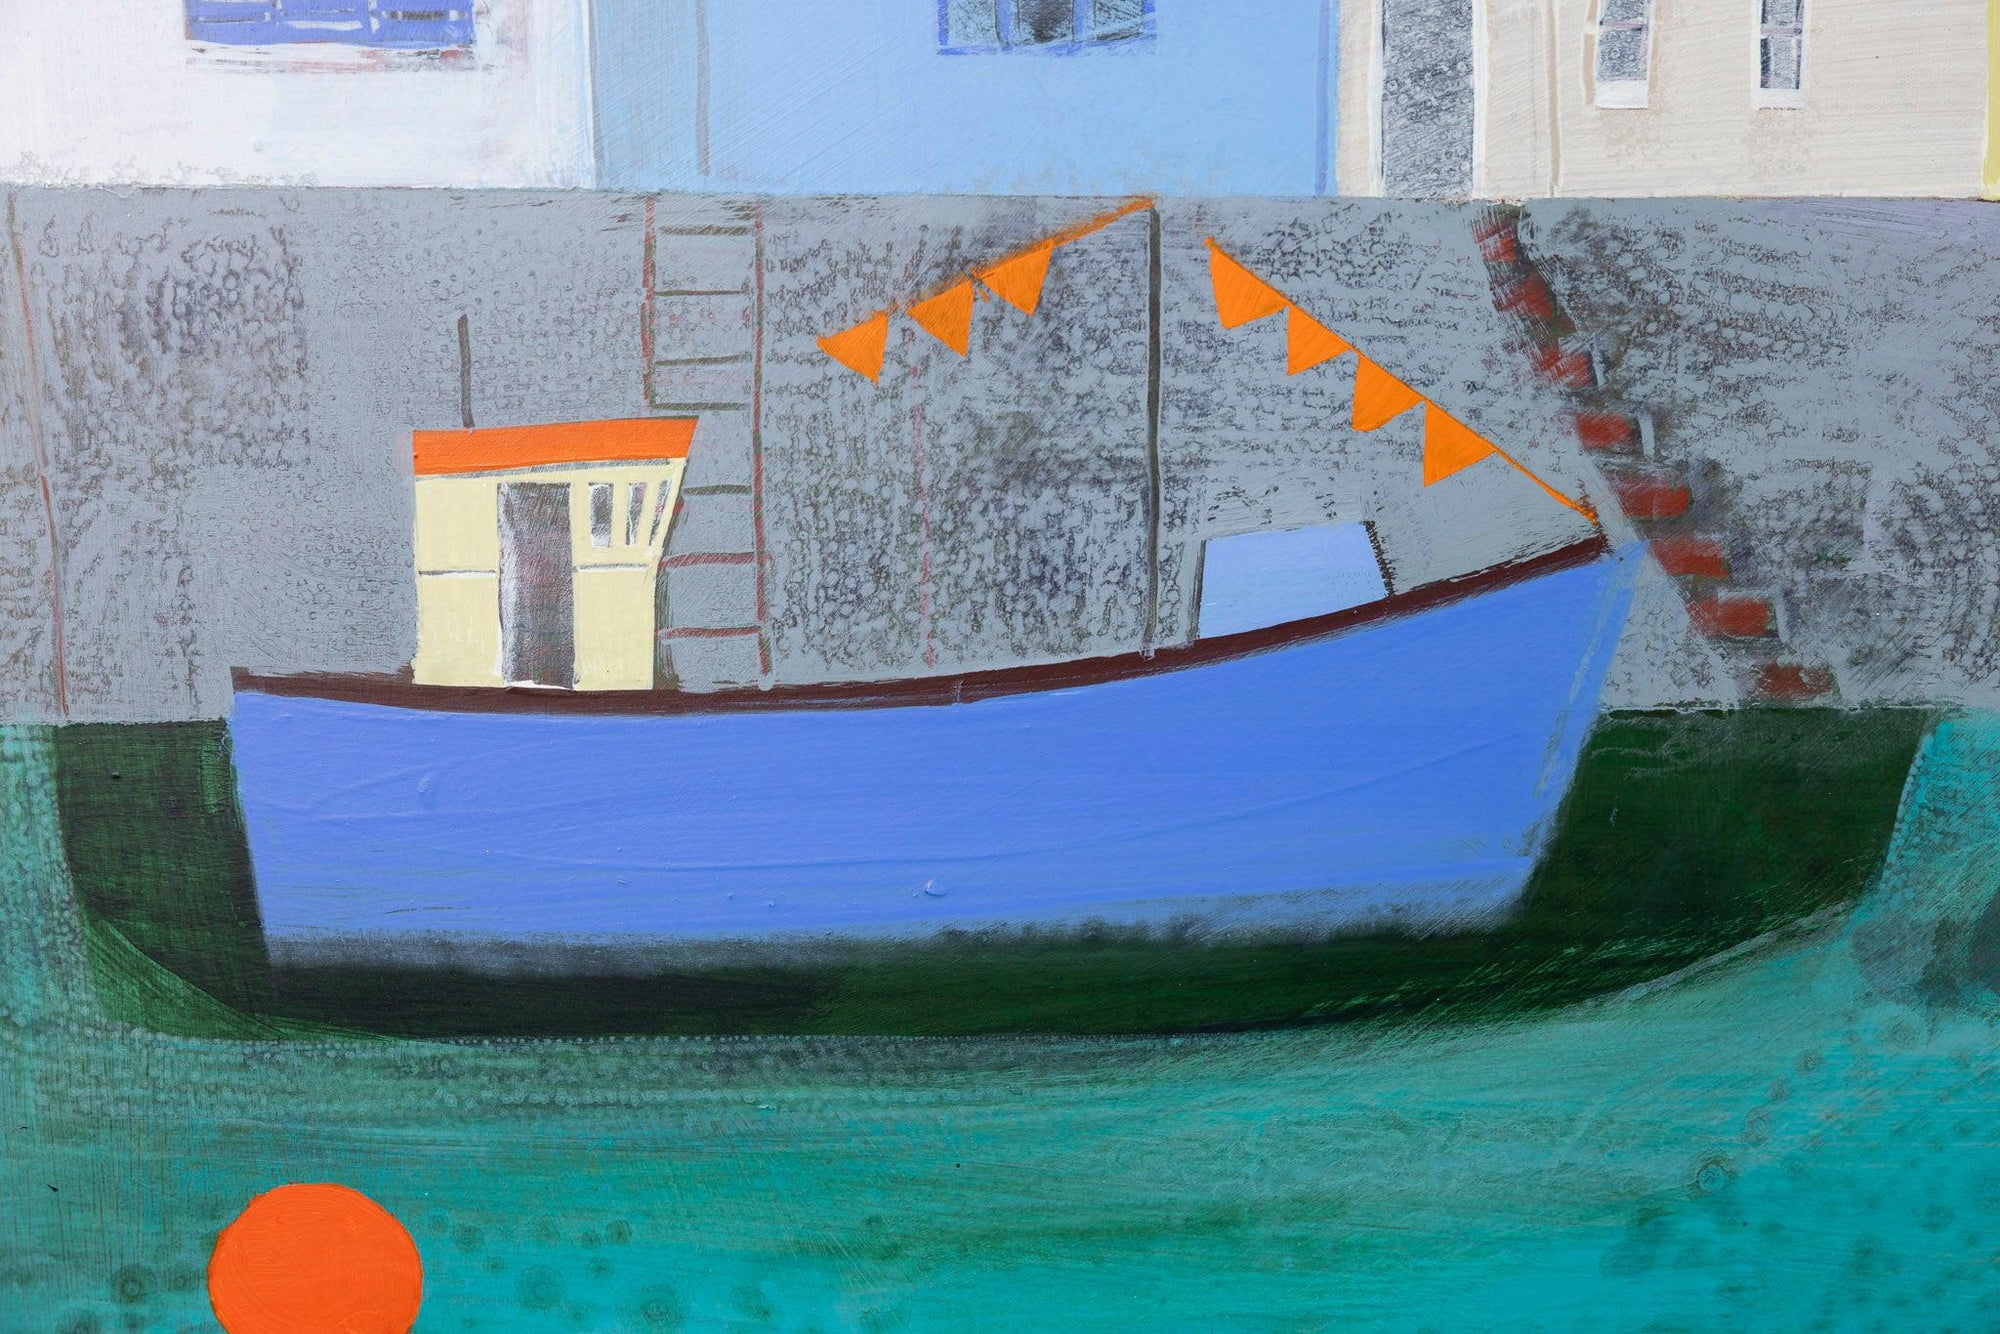 Quayside Ramble, by Emma Dunbar, available from Padstow Gallery, Cornwall